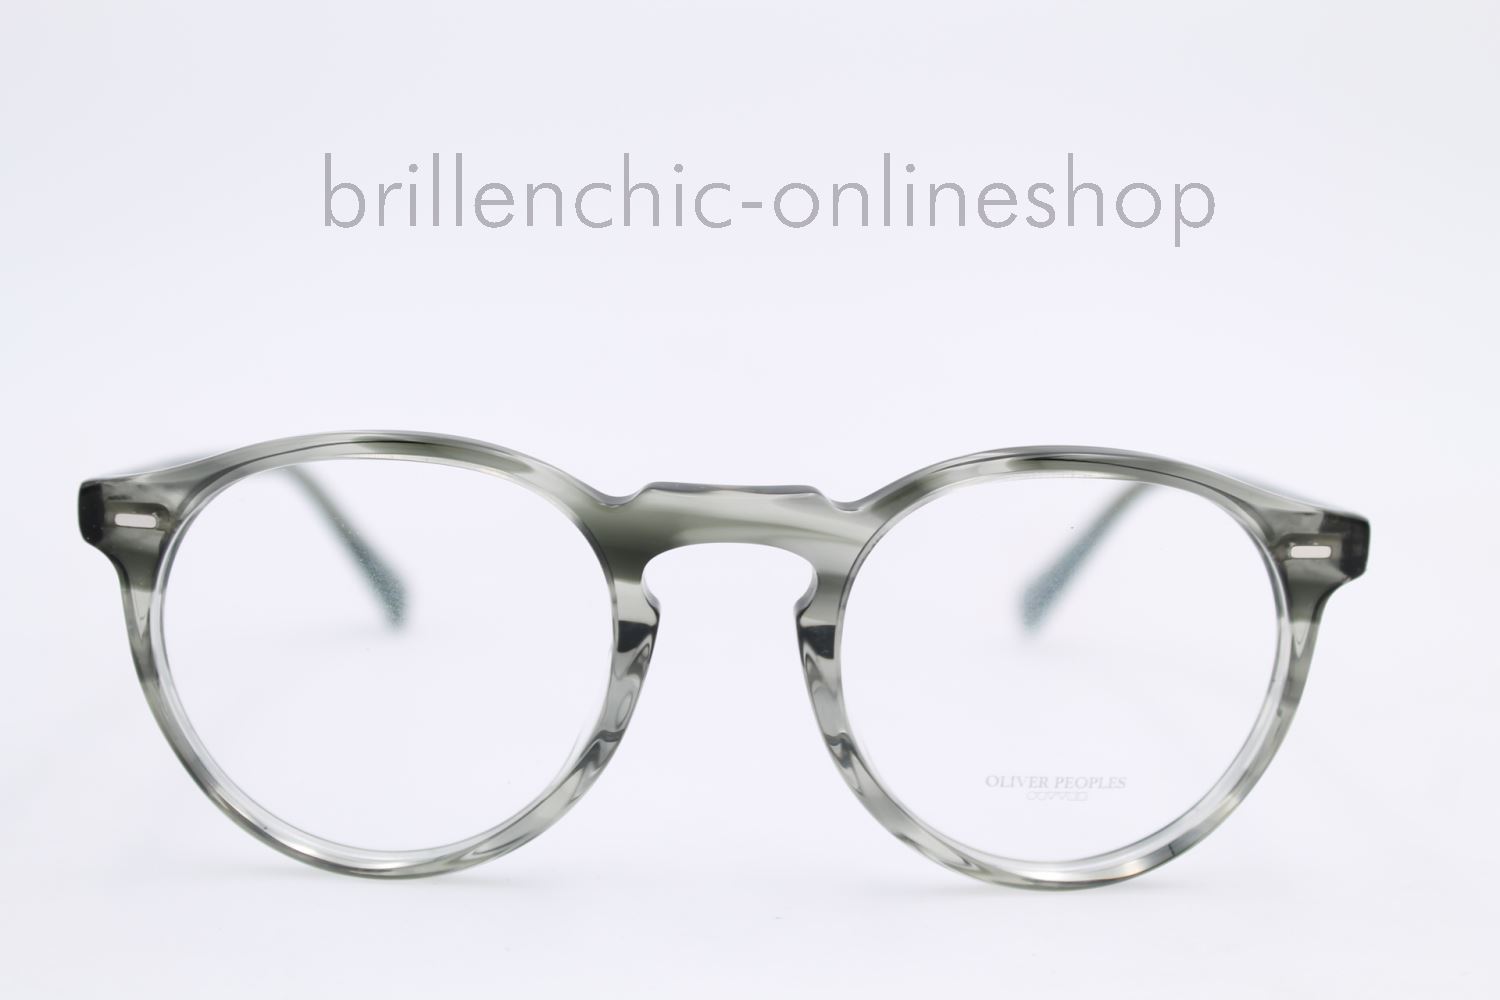 Brillenchic-onlineshop in Berlin - OLIVER PEOPLES GREGORY PECK OV 5186 1705  